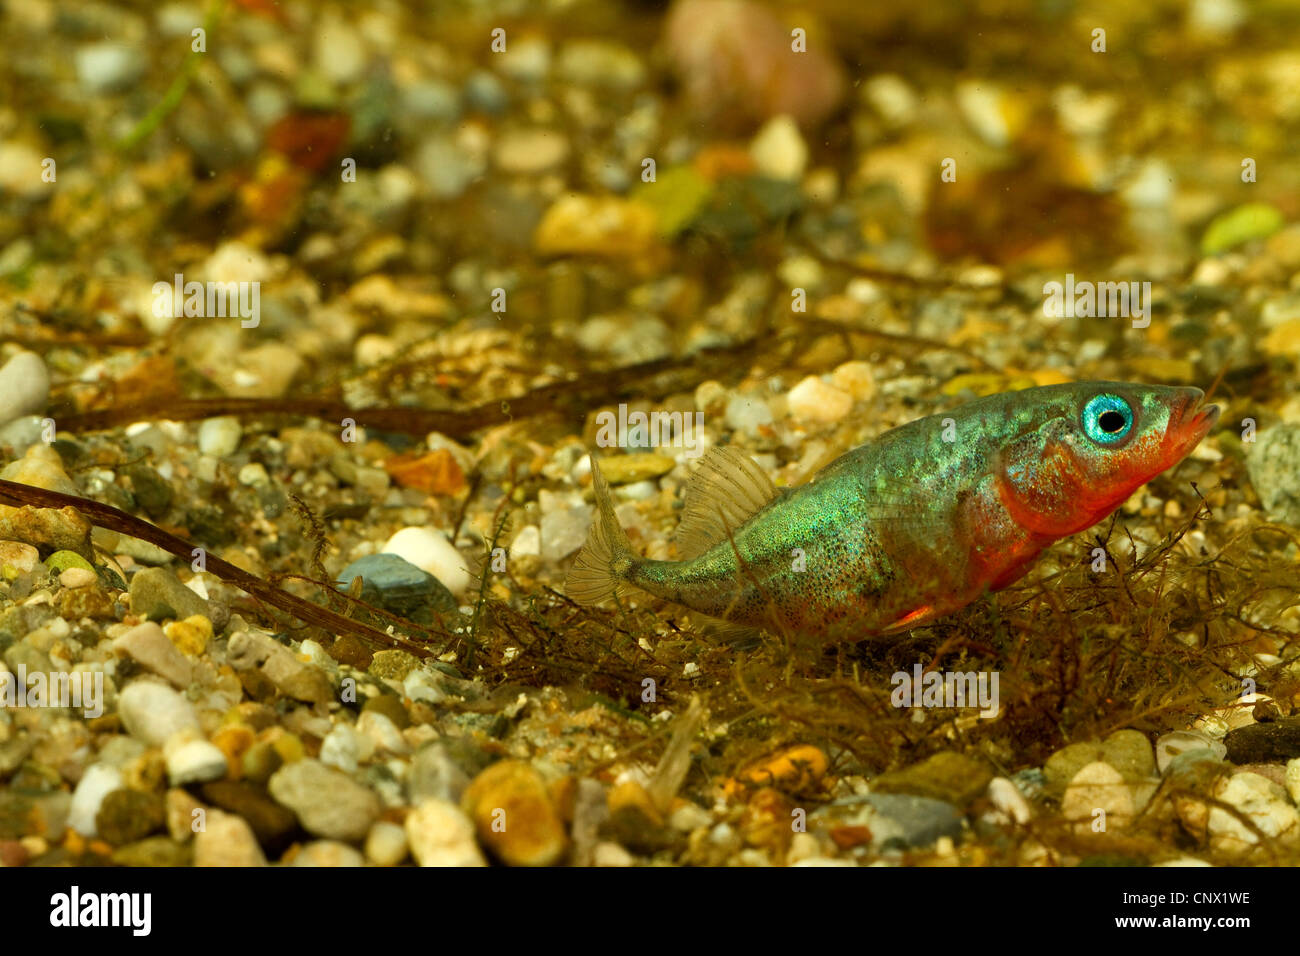 three-spined stickleback (Gasterosteus aculeatus), male building a nest, sticking nesting material together, Germany Stock Photo